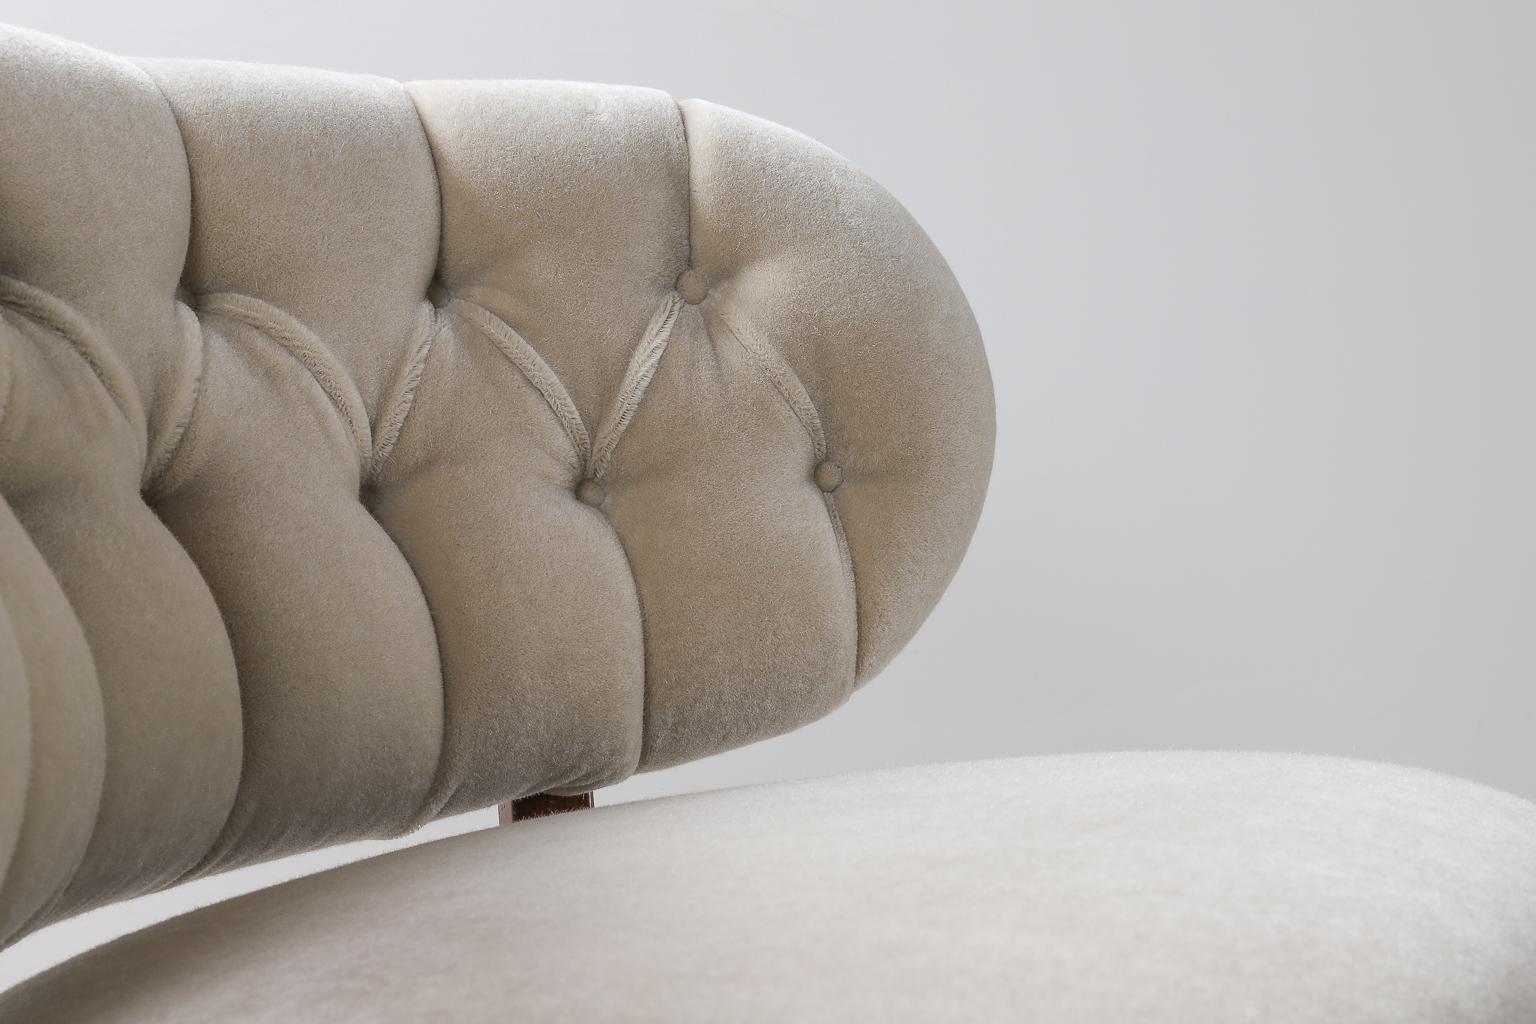 Armchair by Otto Schulz 1930s-1940s Upholstered in Bespoke Mohair 5